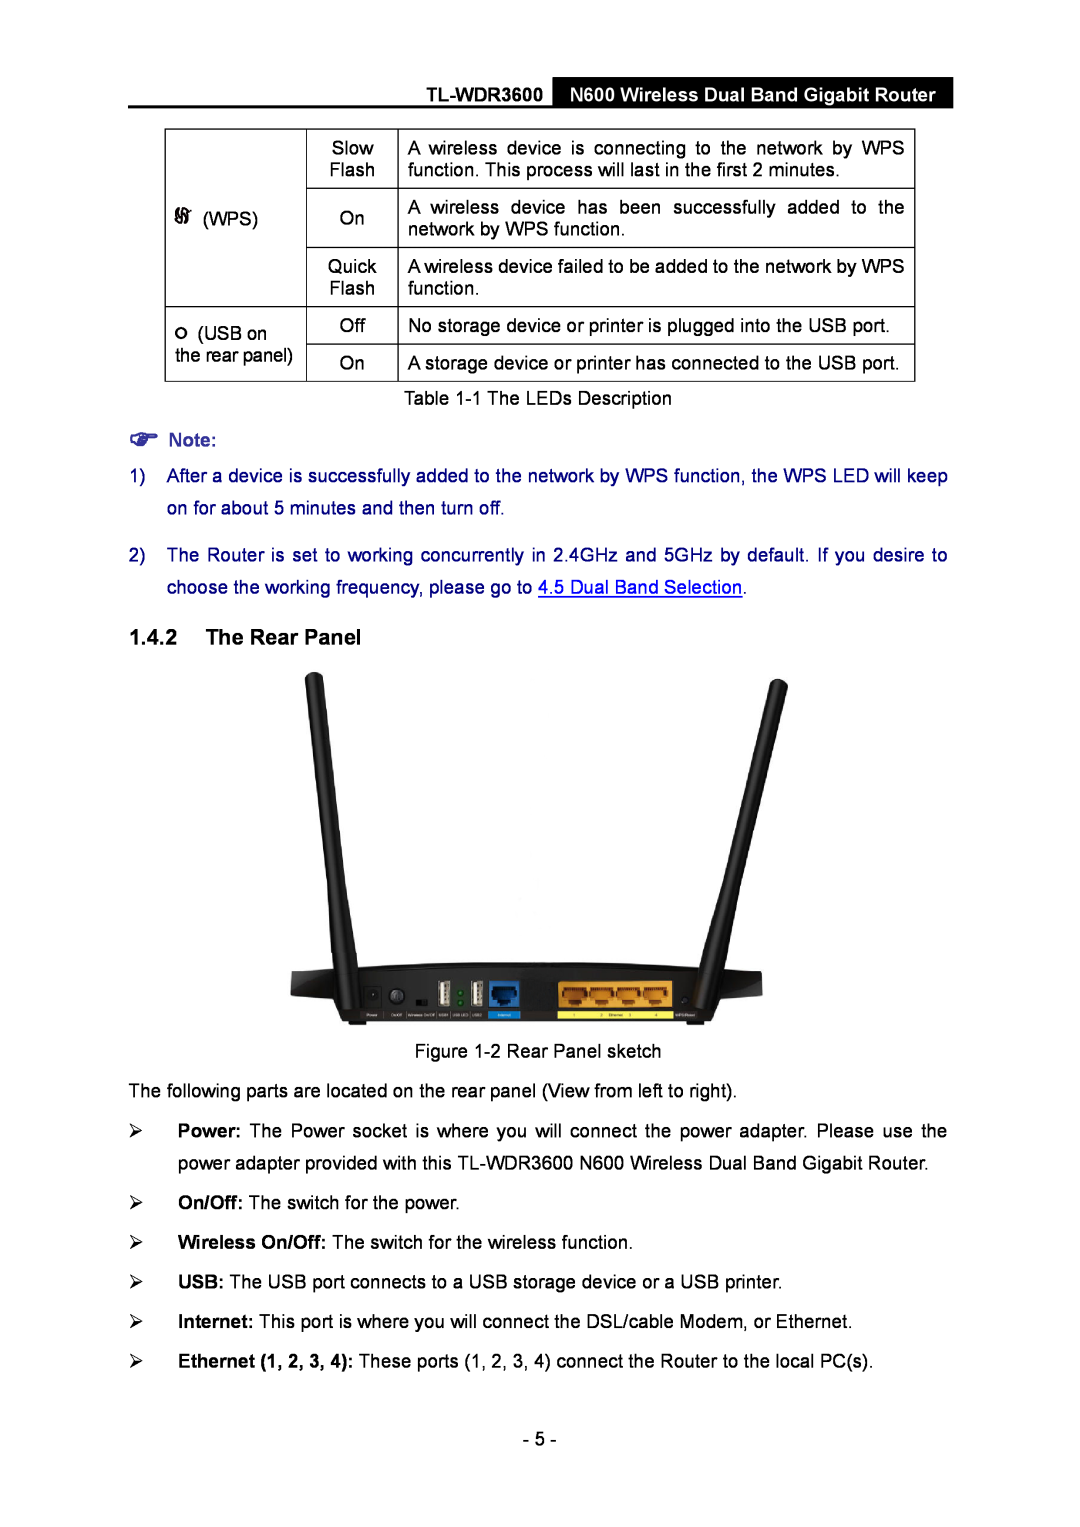 TP-Link TL-WDR3600 manual The Rear Panel, N600 Wireless Dual Band Gigabit Router,  Note 